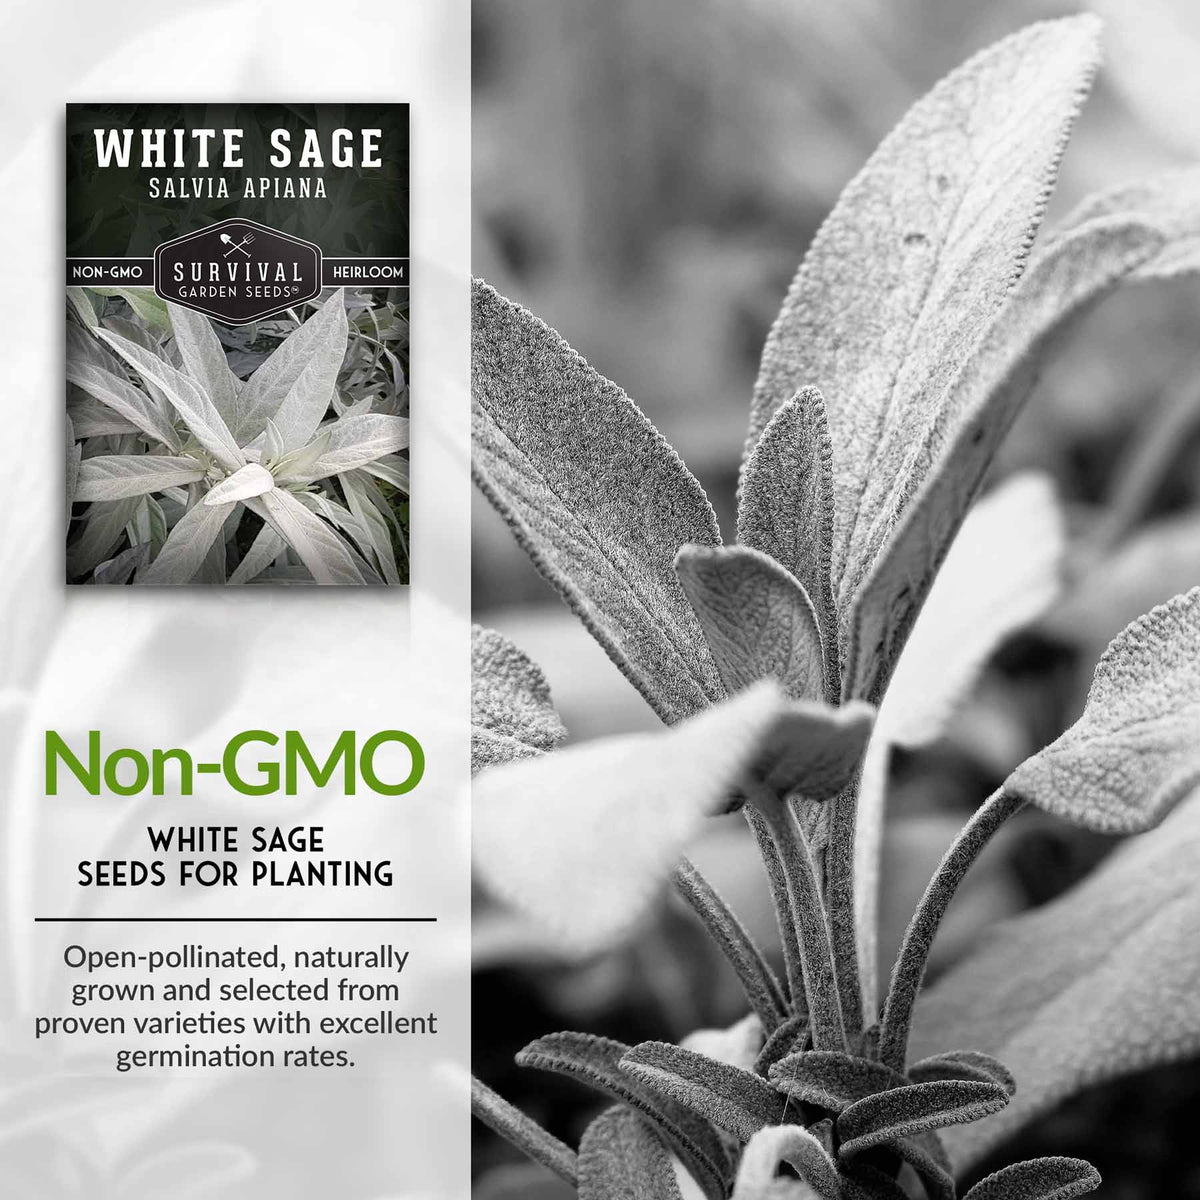 Non-GMO white sage seeds for planting